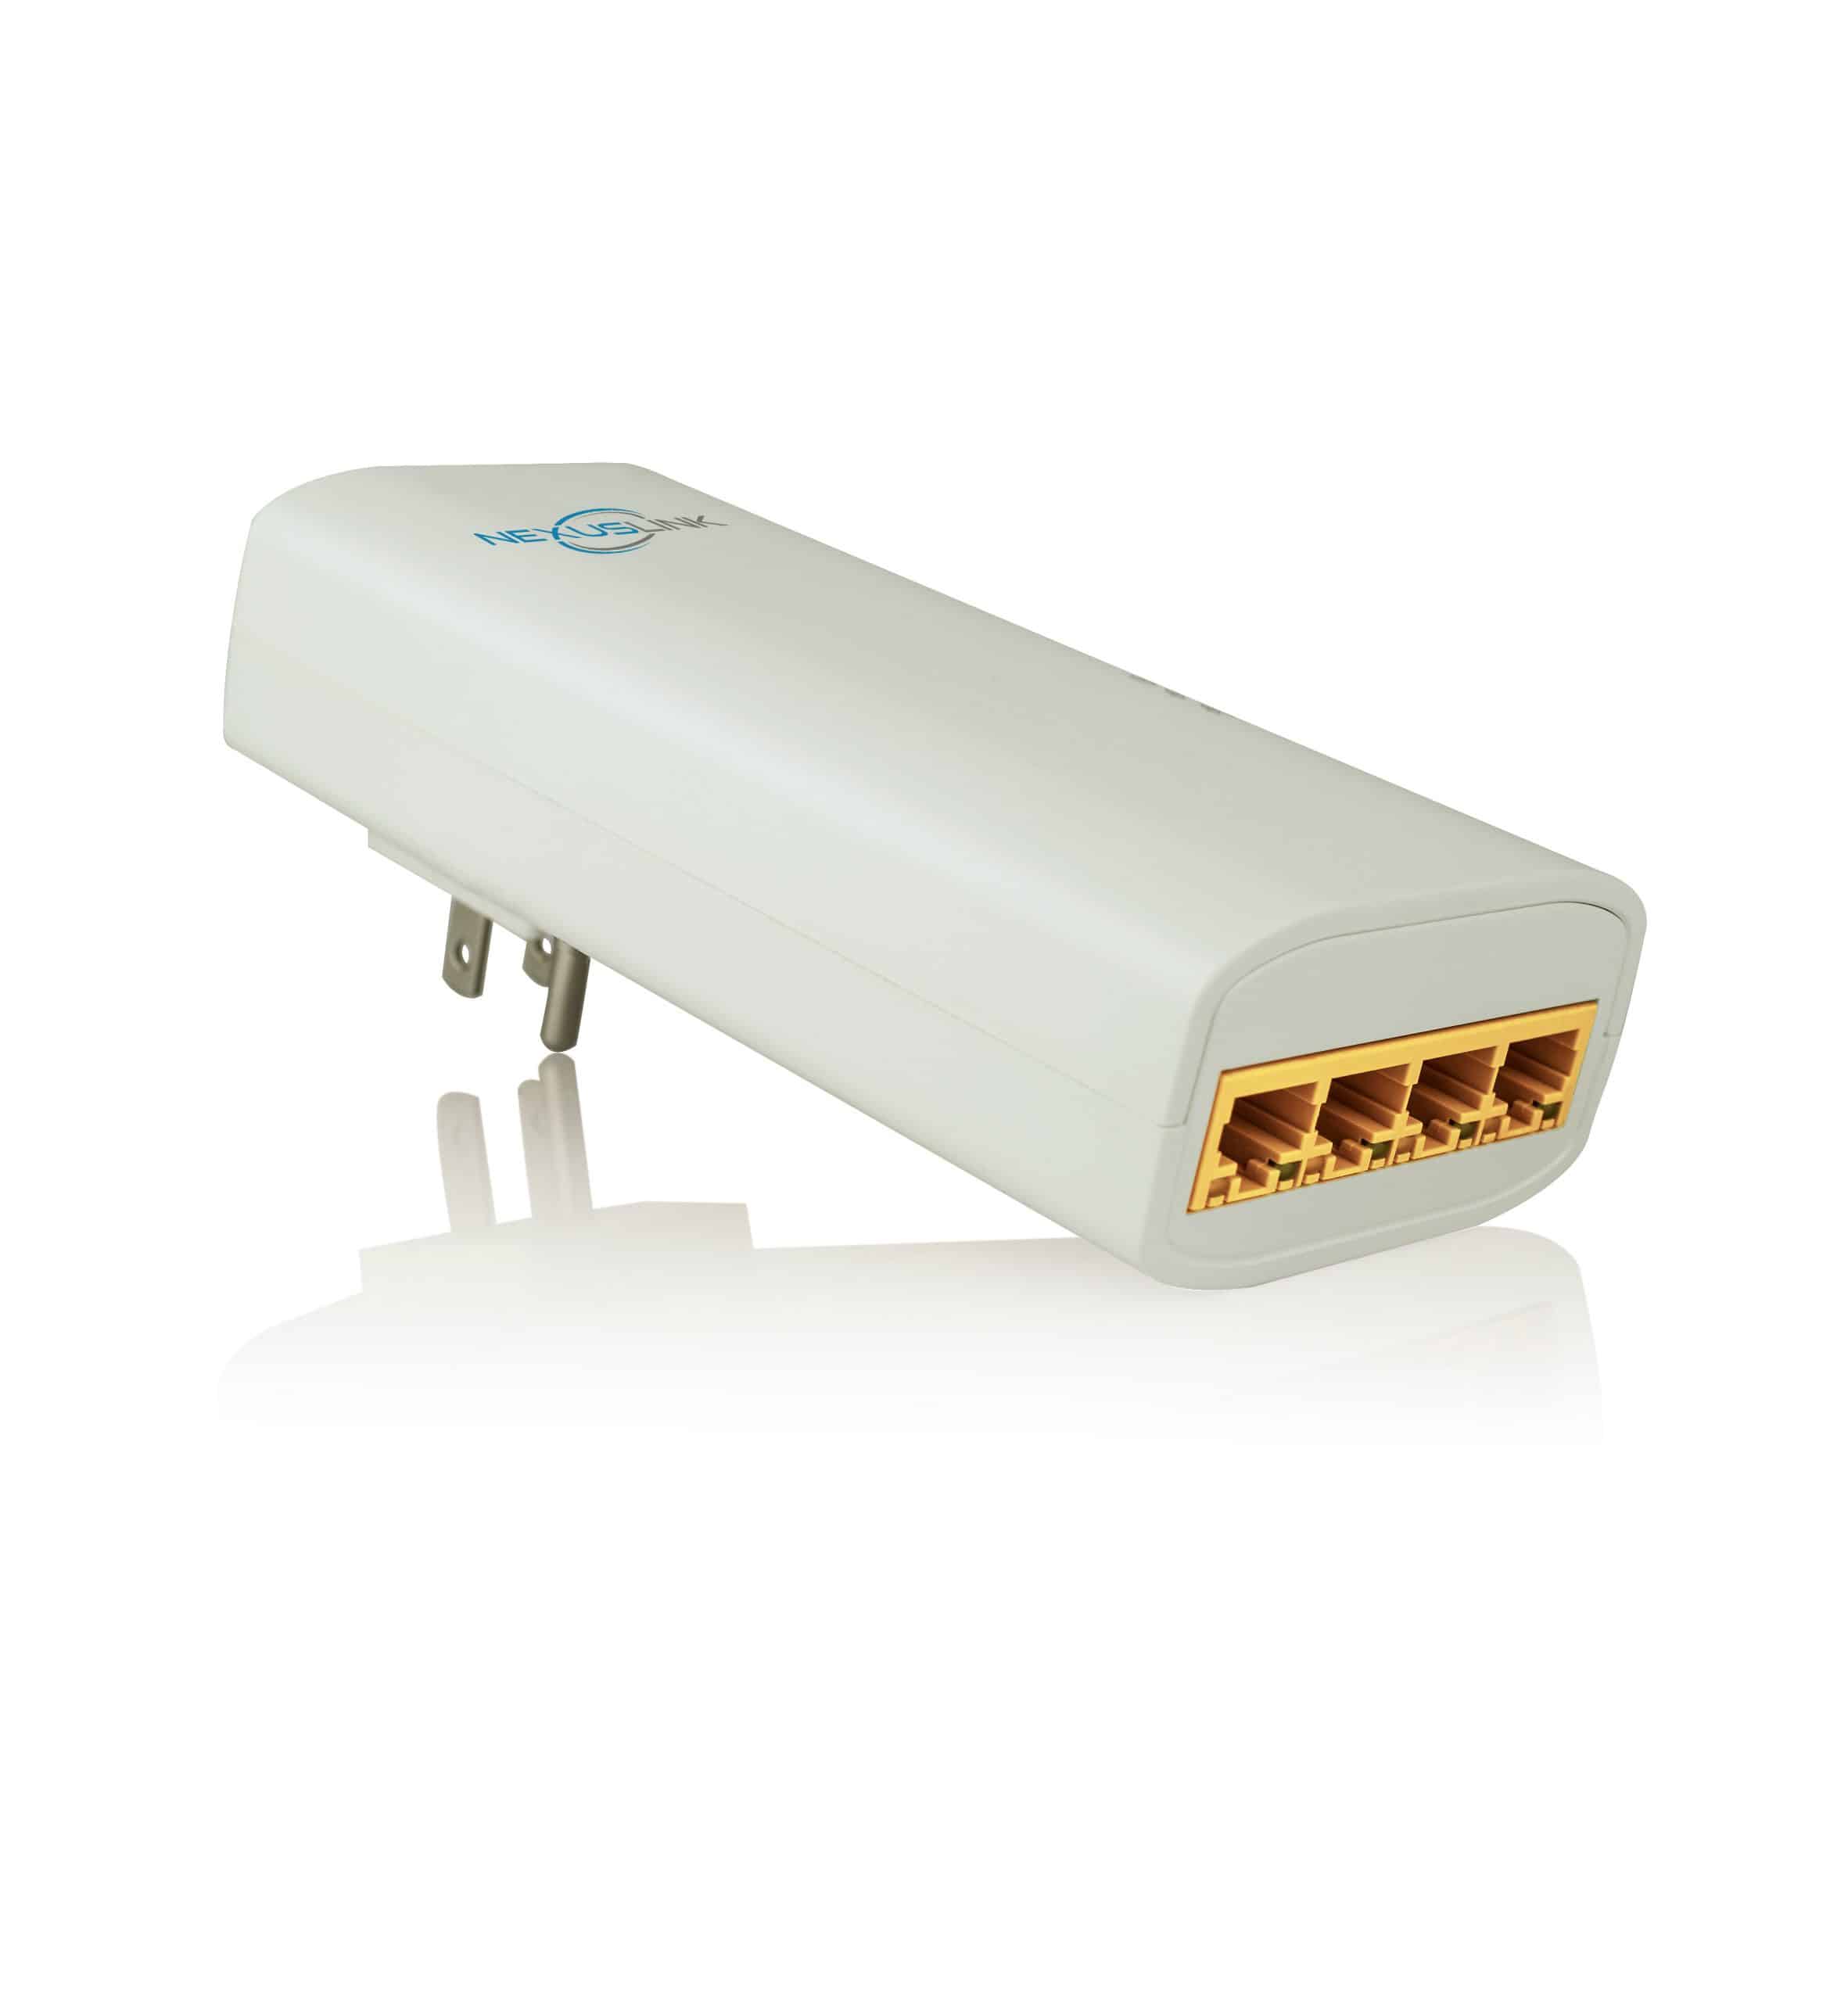 Powerline Ethernet Adapter 4 Port Switch